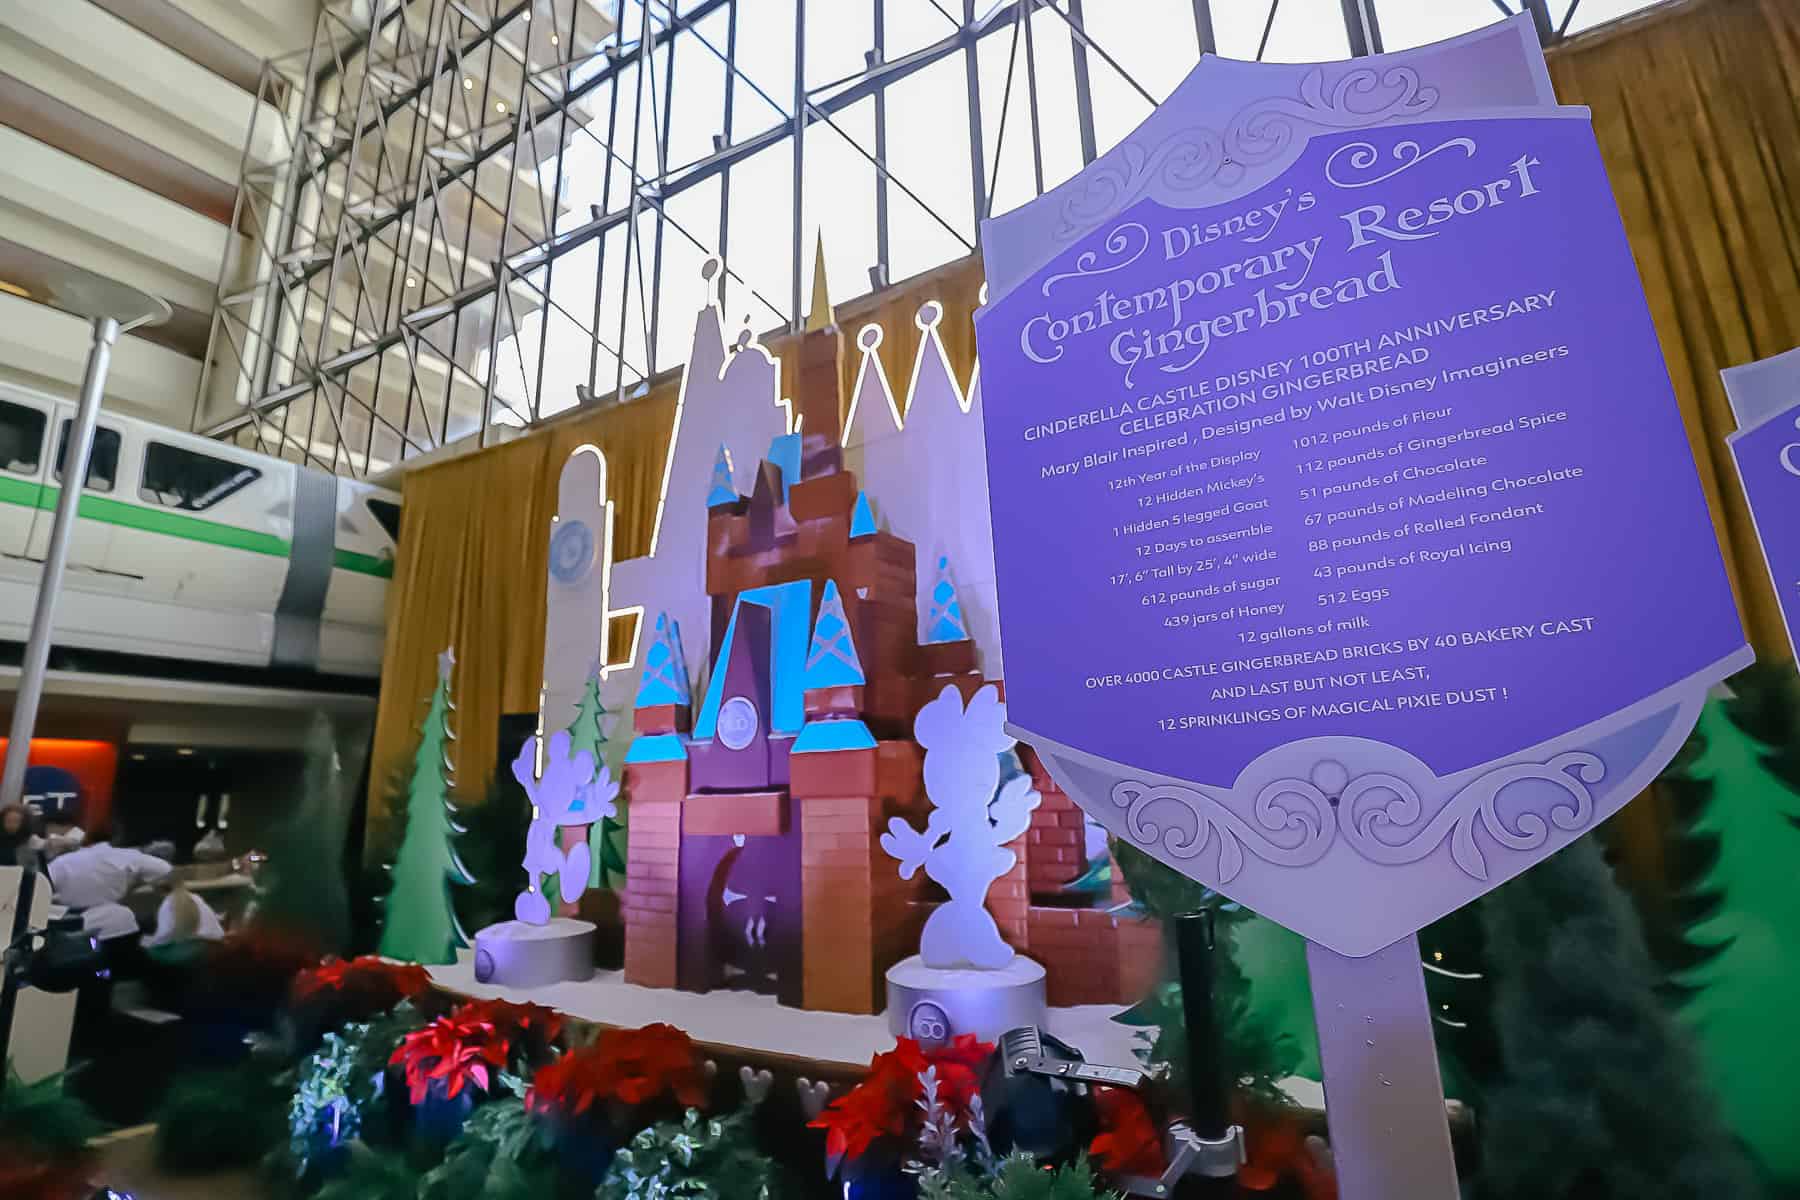 Gingerbread display at Disney's Contemporary as Monorail passes overhead.